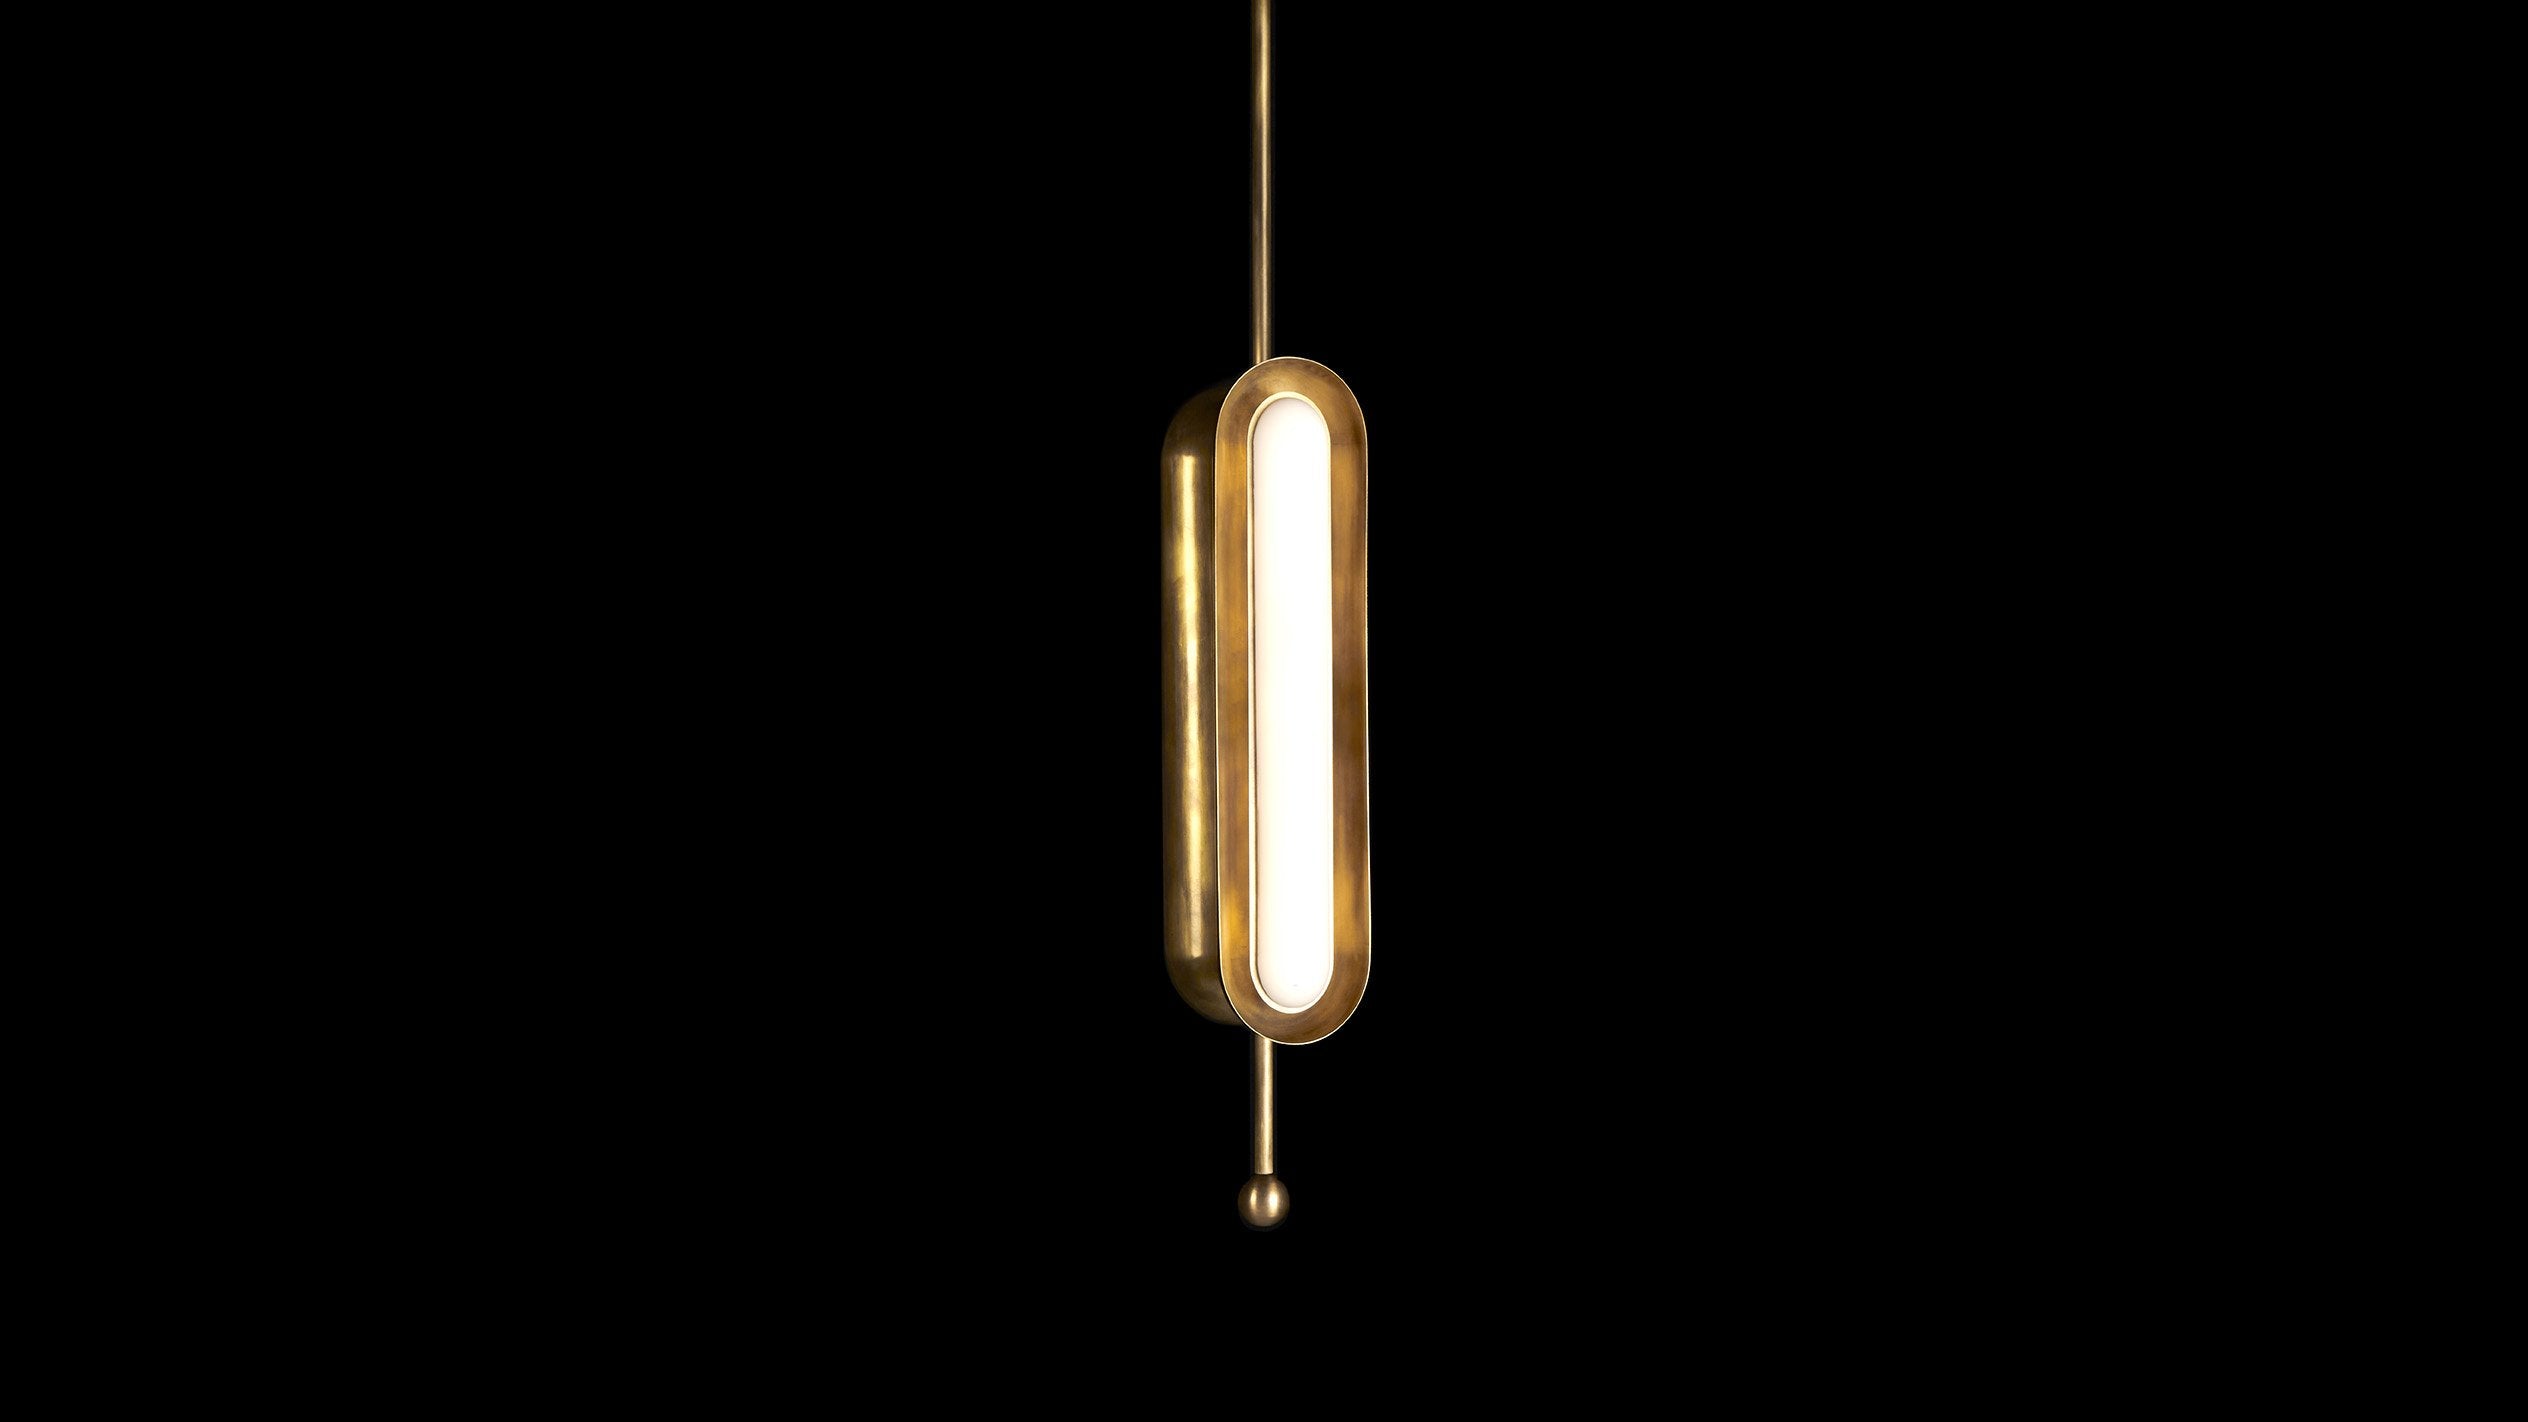 CIRCUIT : 2 vertical ceiling pendant in Aged Brass finish, hanging against a black background. 